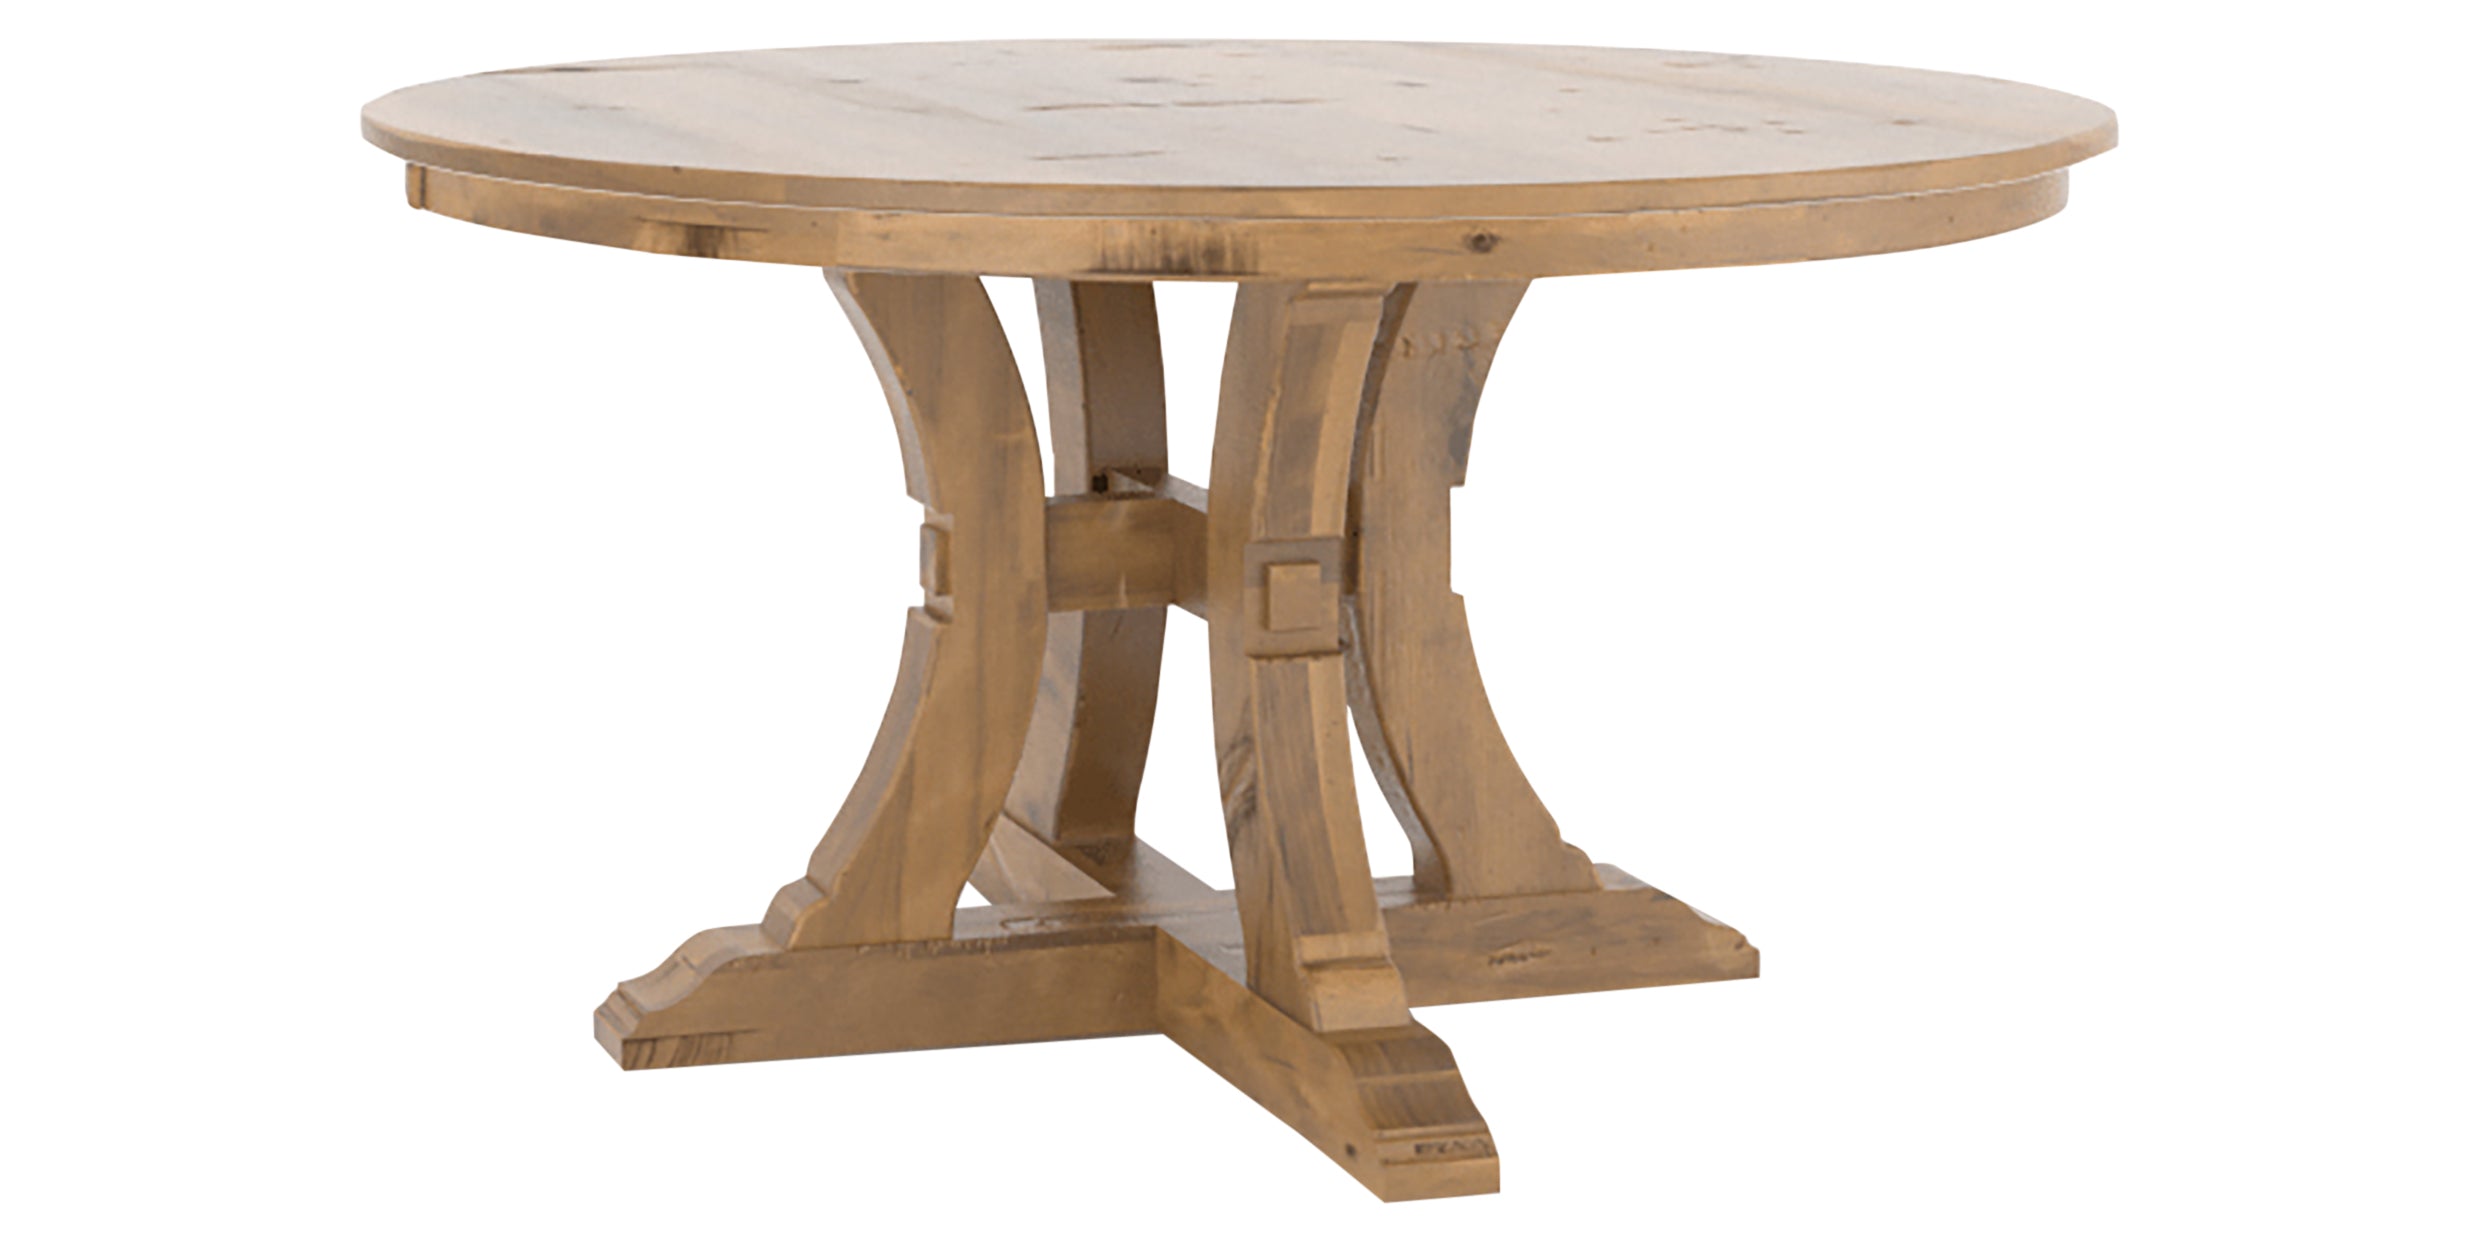 Oak Washed HU | Canadel Champlain Dining Table 5454 | Valley Ridge Furniture